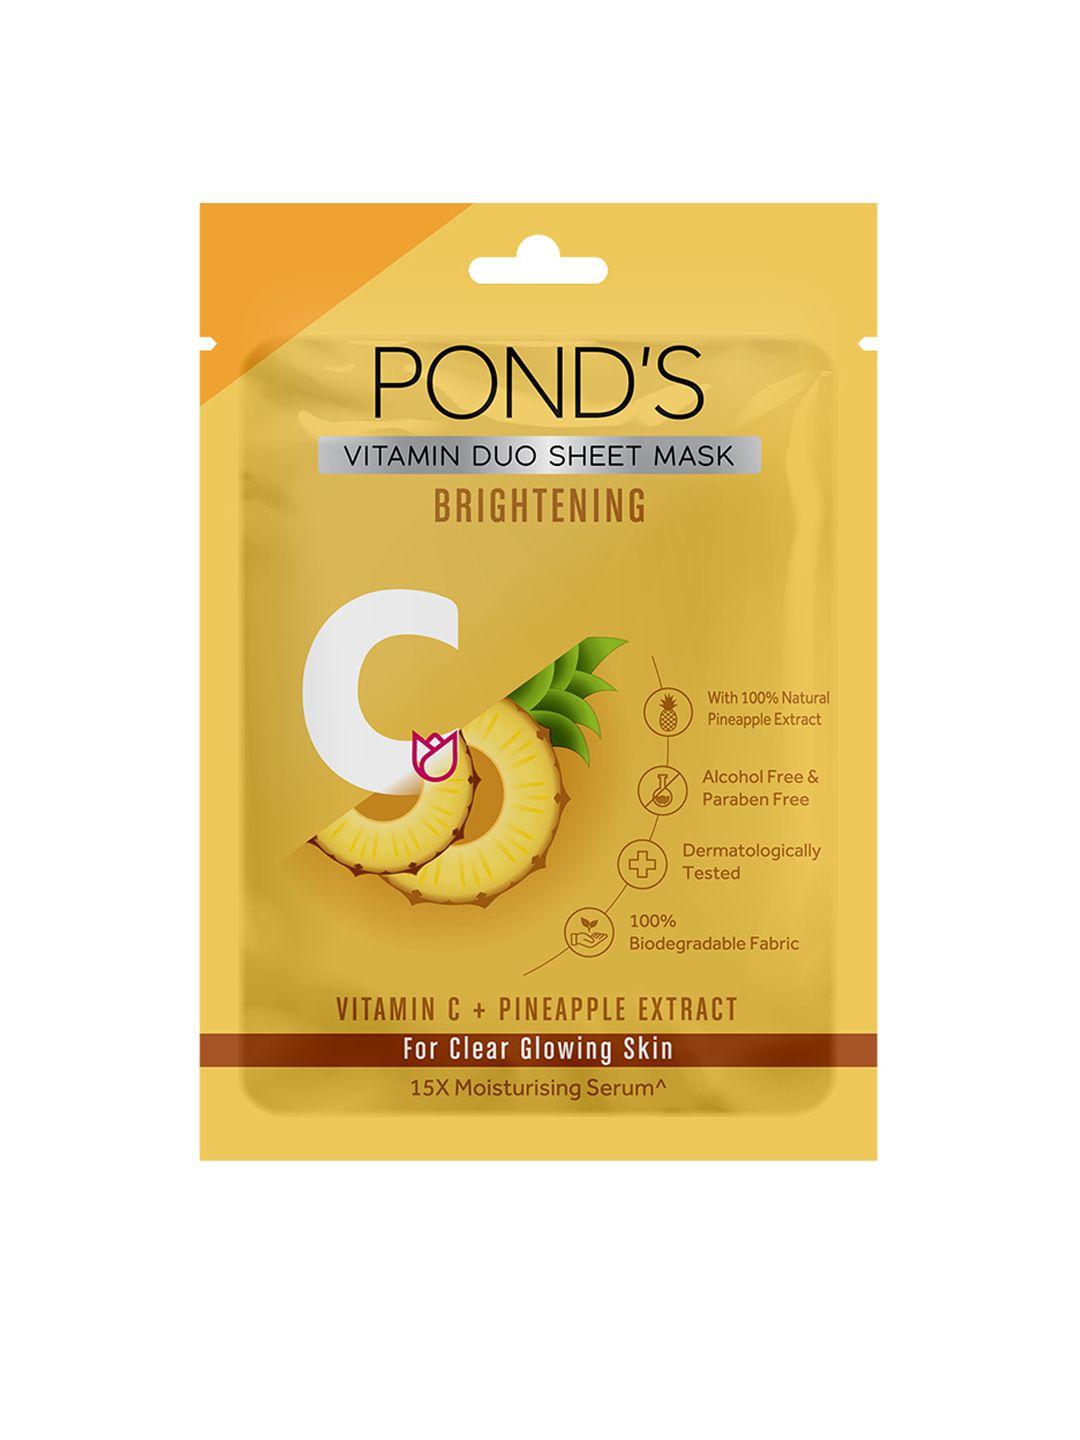 ponds-vitamin-c-+-pineapple-extract-brightening-sheet-mask-for-clear-glowing-skin-25-ml